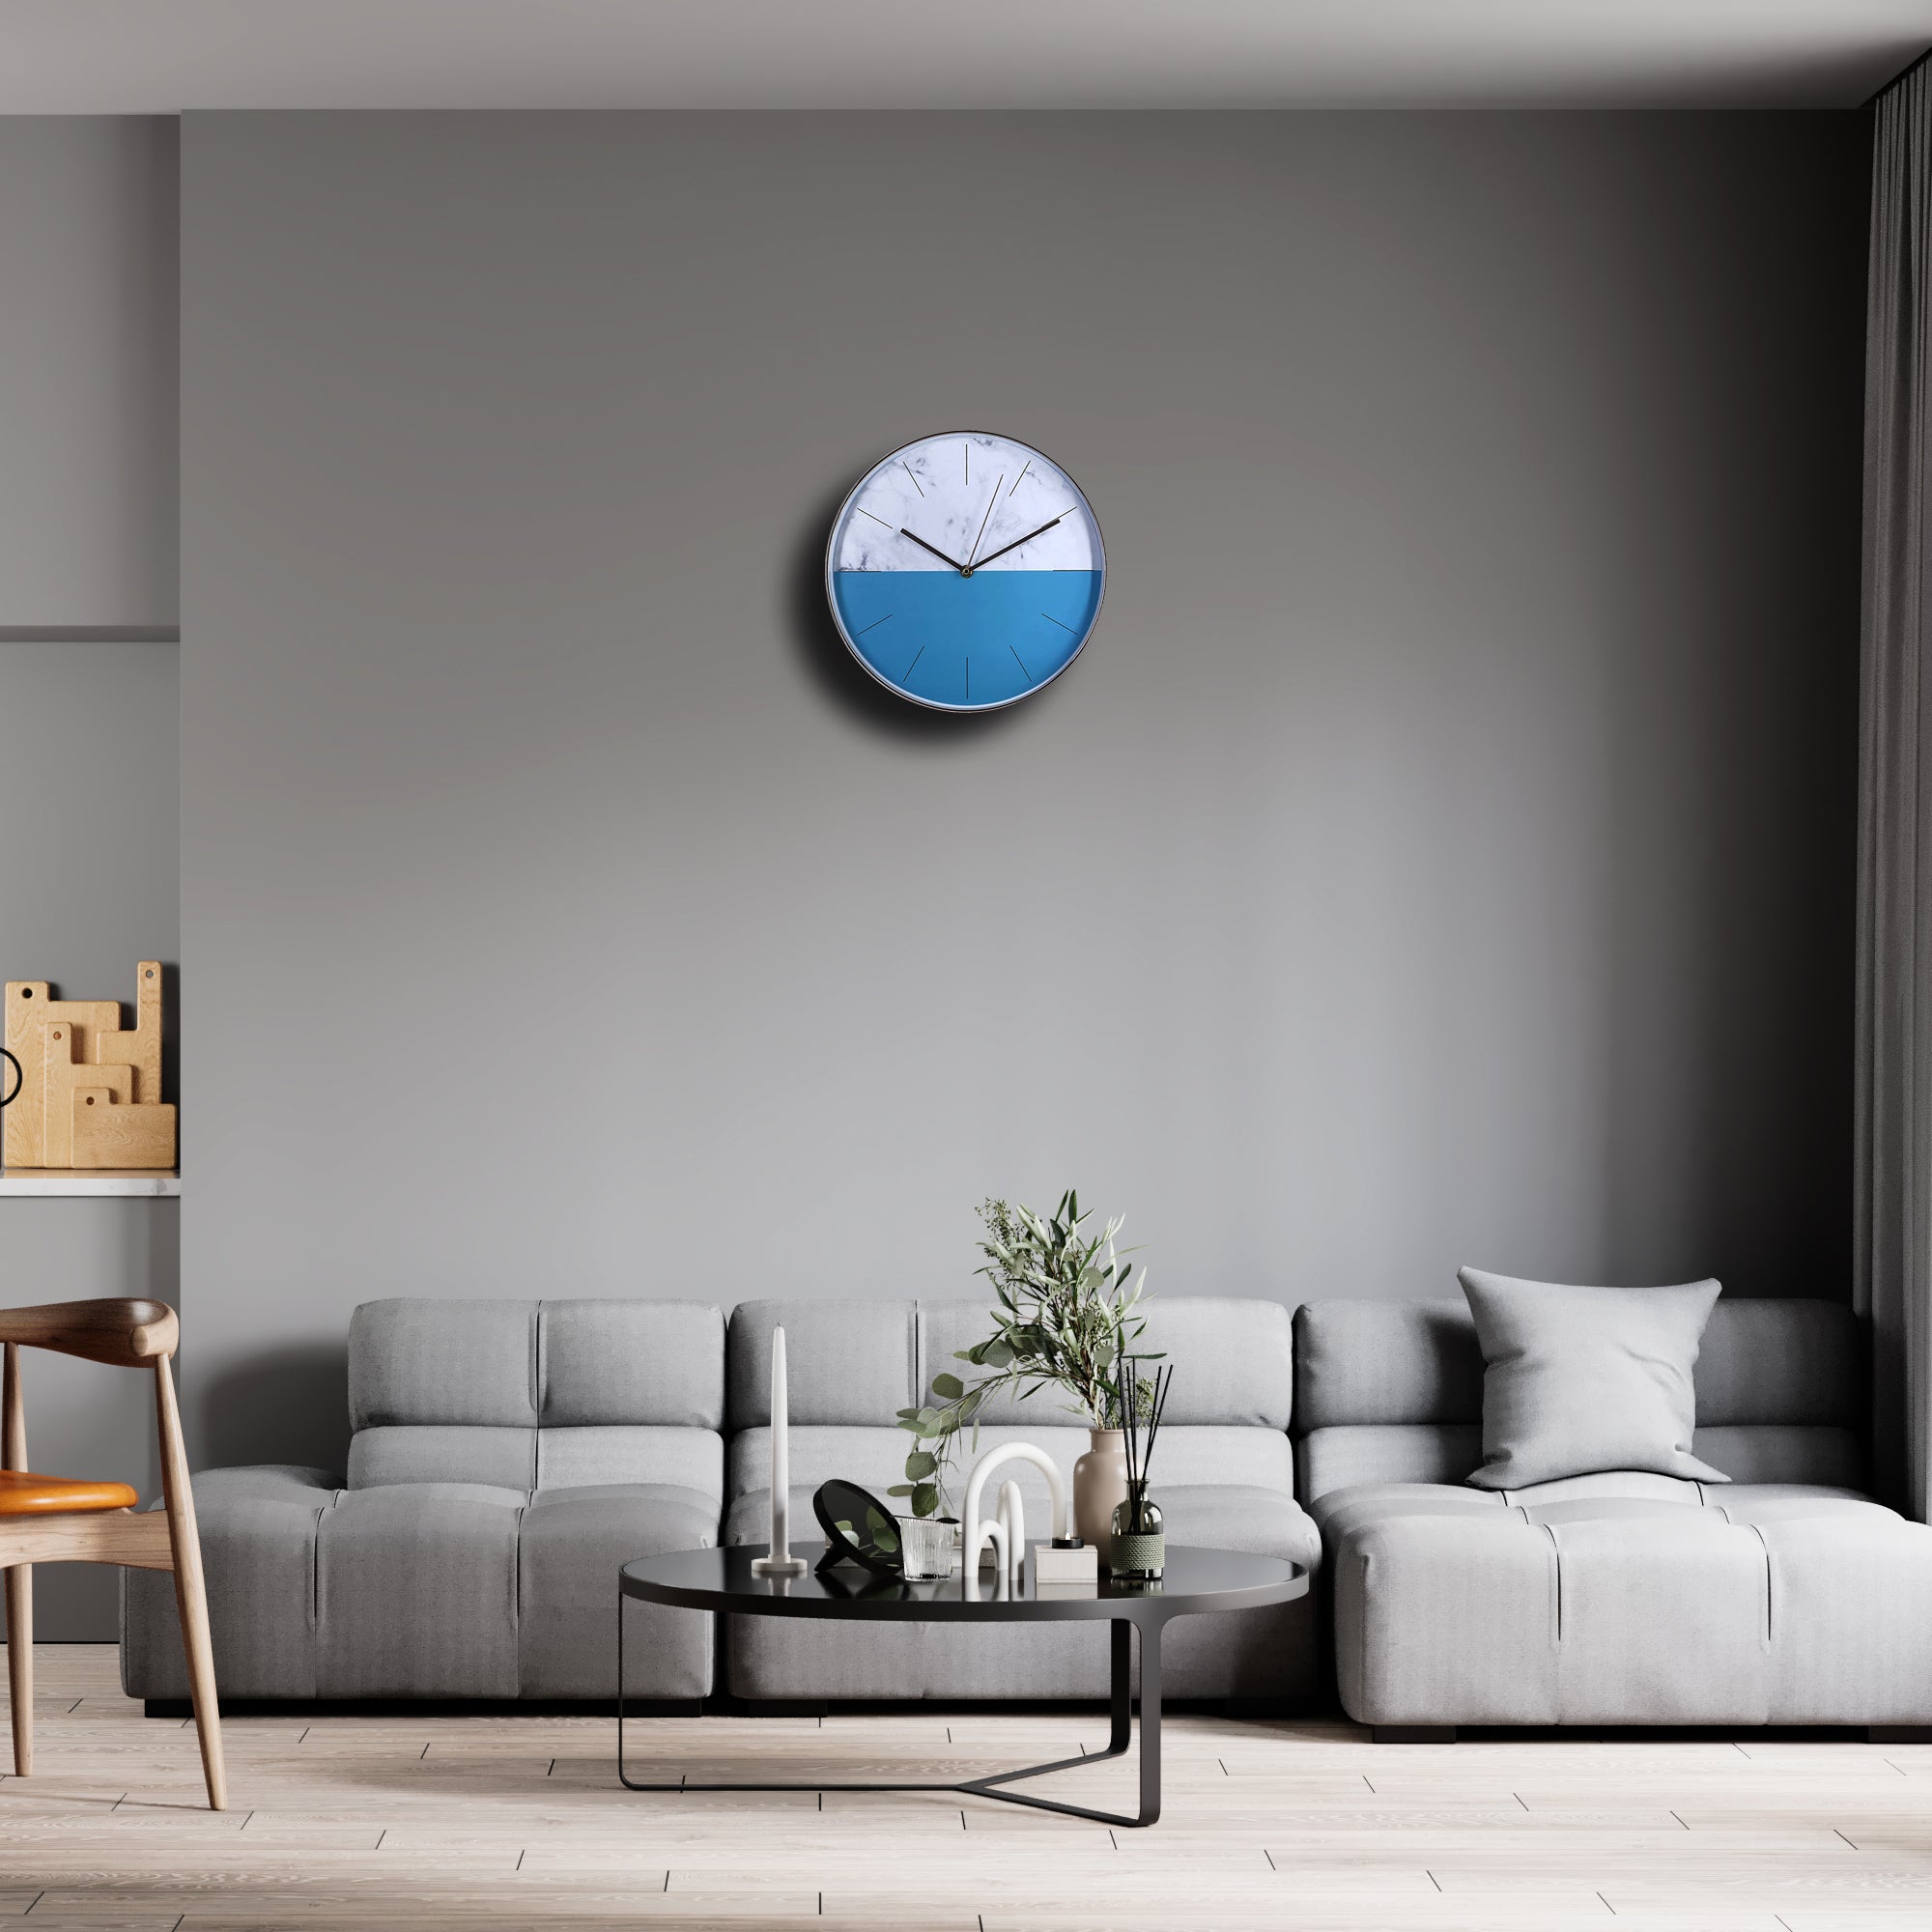 Wall Clock For Bedroom & Home | Silence White-Blue Wall-Clock - Star Work 